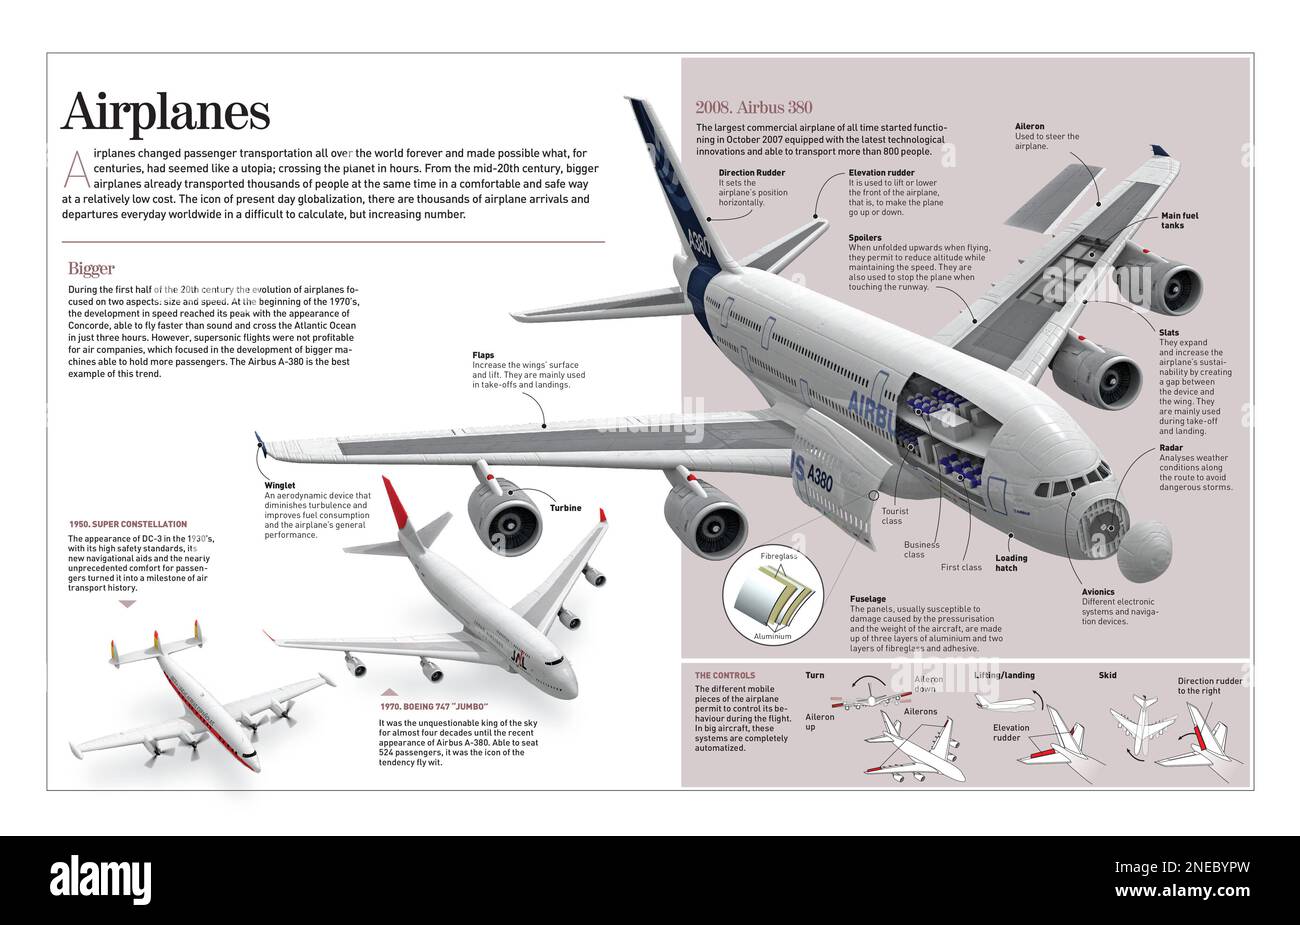 Infographic about the aeroplane (1903-today) the means of transportation that changed the way people move around the world. [Adobe InDesign (.indd); 4960x3188]. Stock Photo